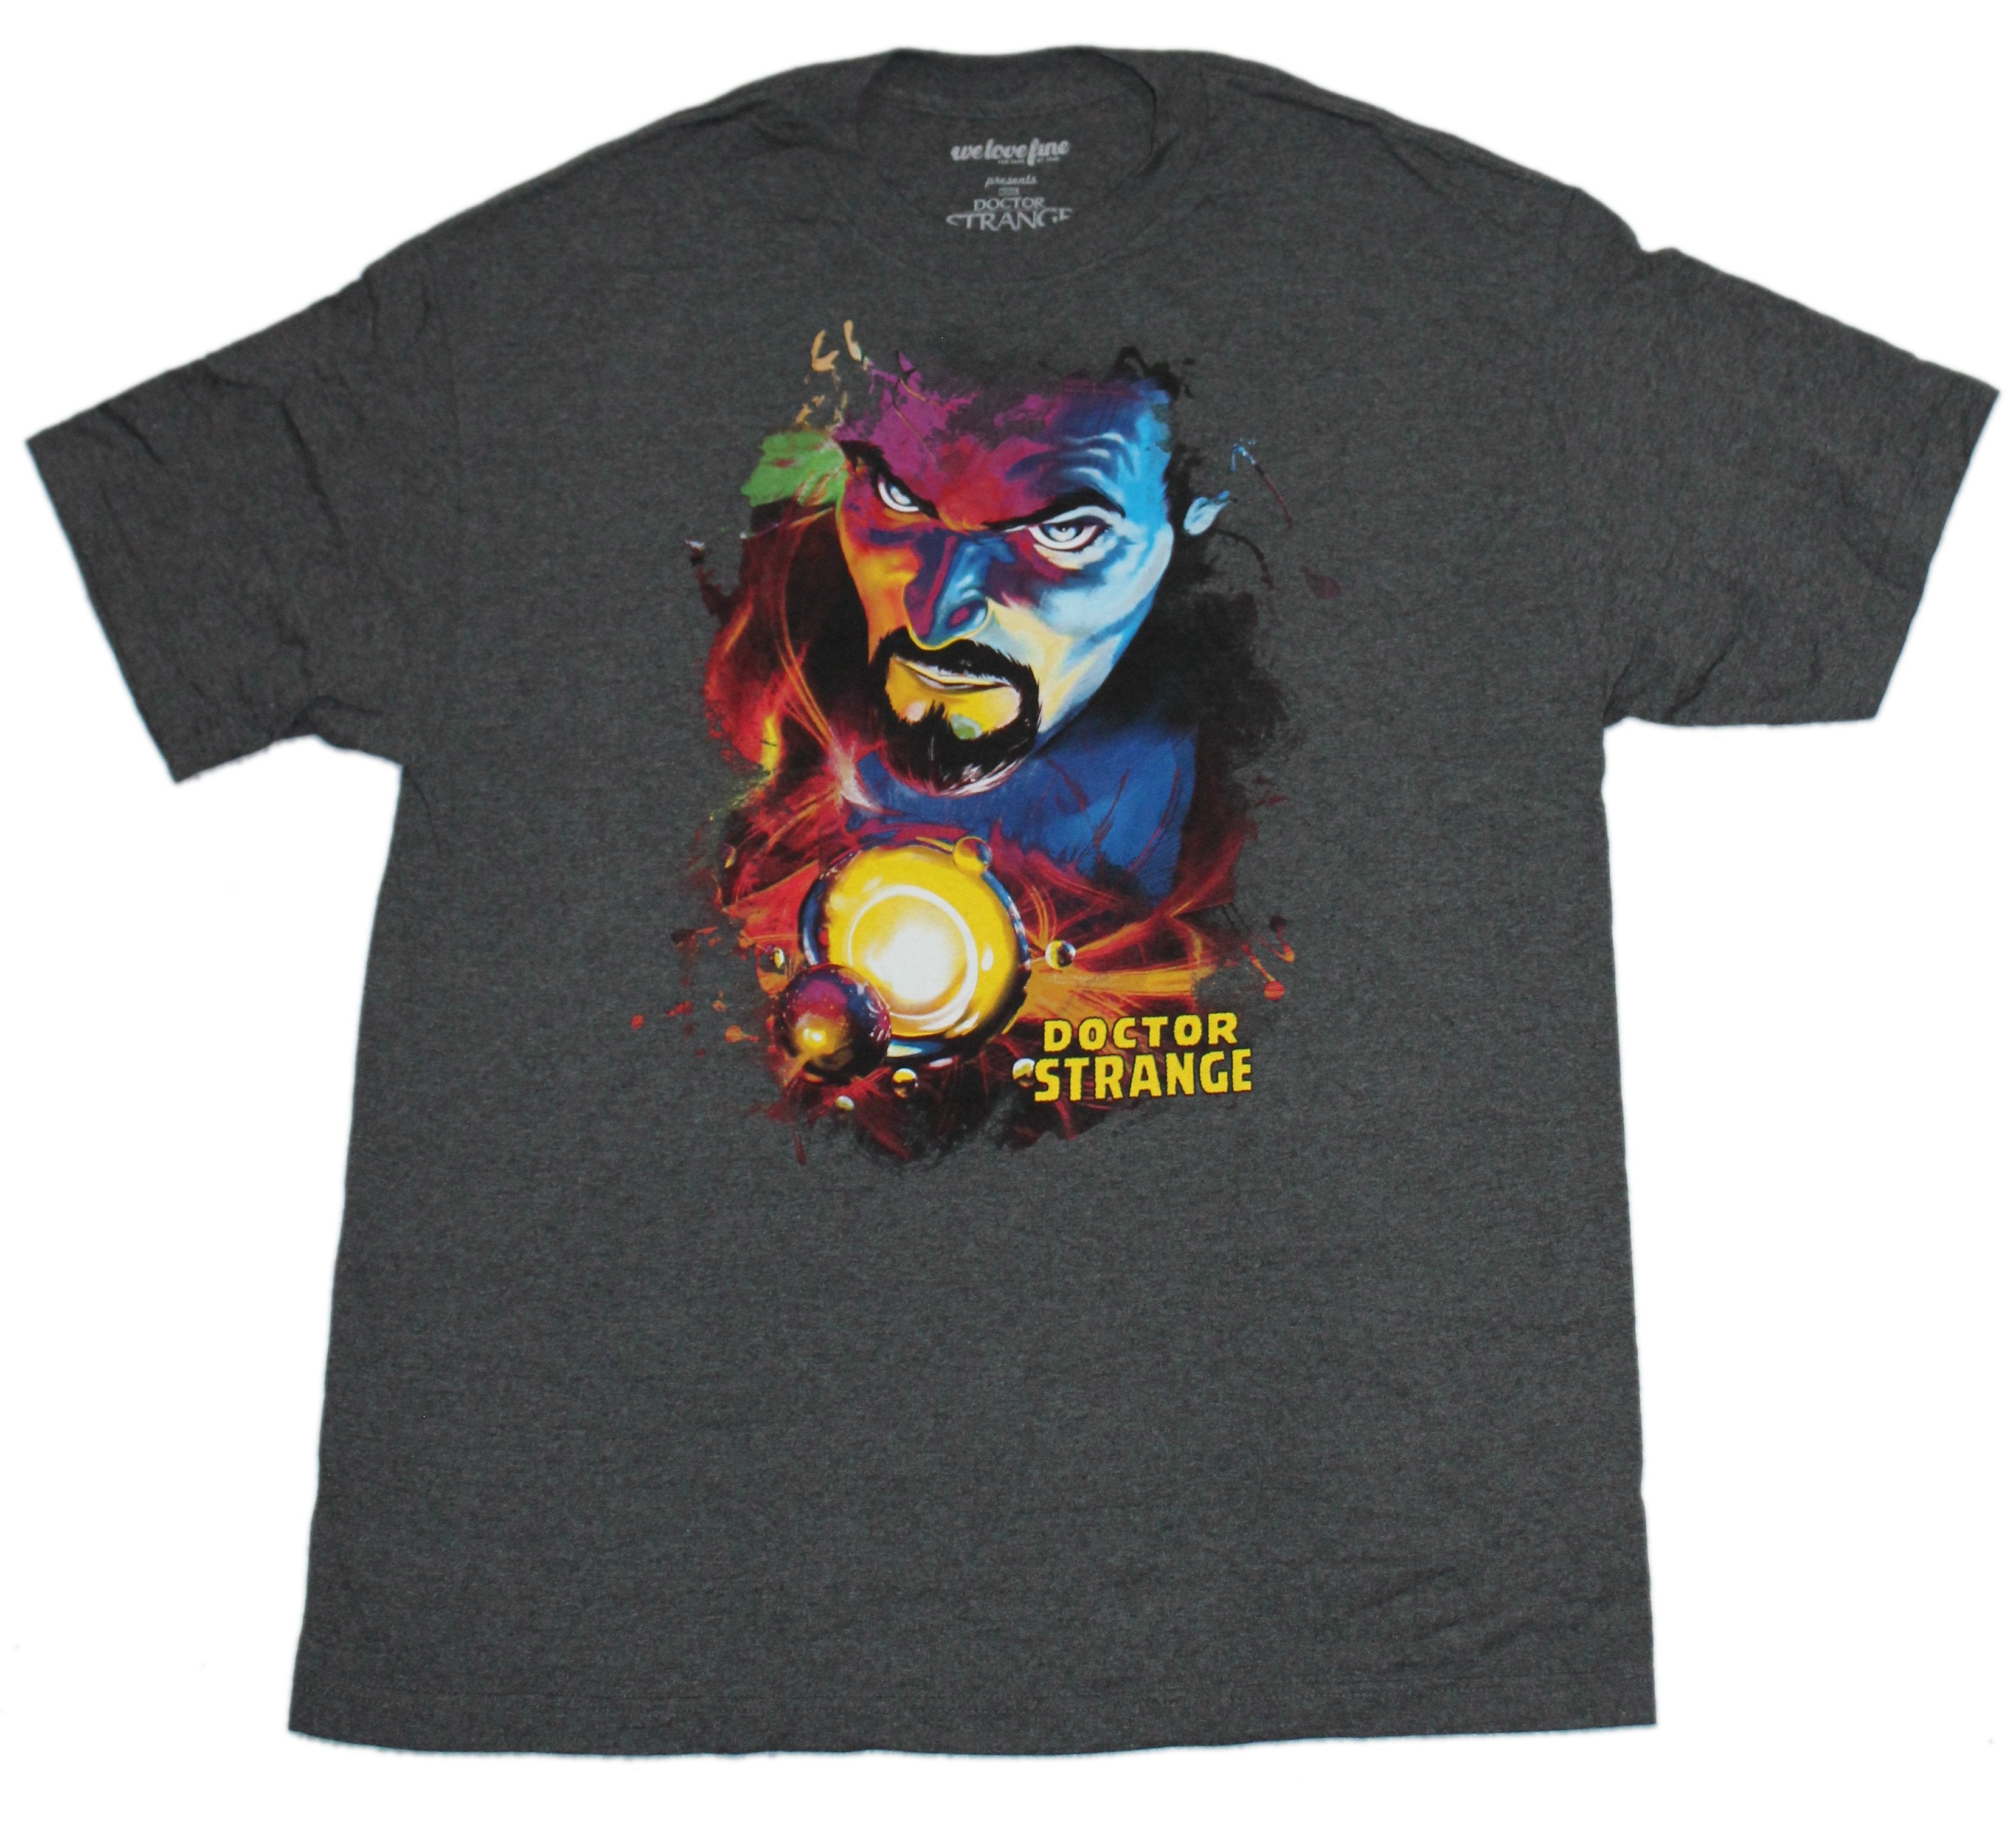 Doctor Strange Mens T-Shirt - Colorful Serious Image over Glowing Light